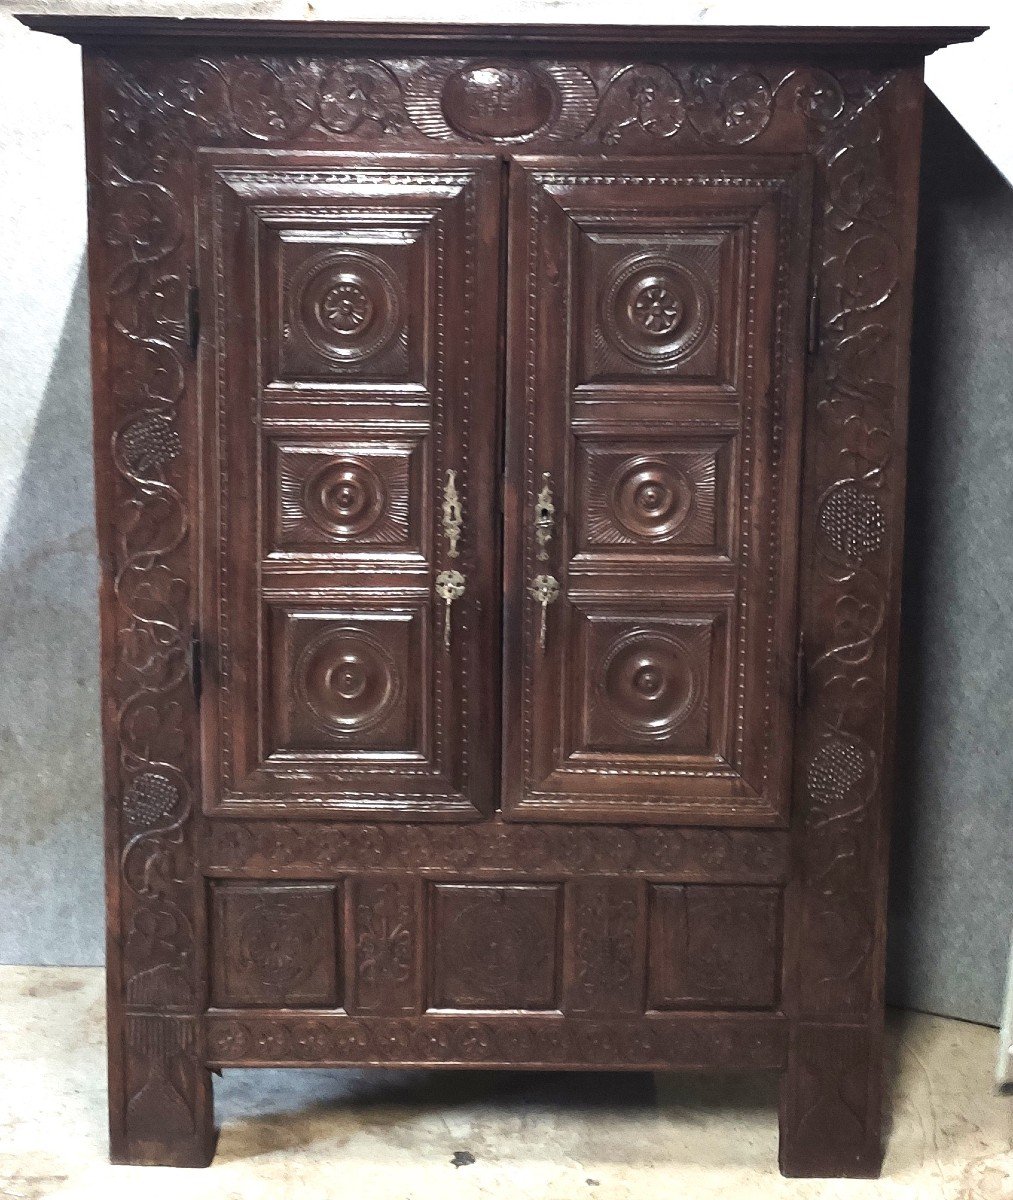 Small Sacristy Oak Wardrobe Monogrammed Ihs And Dating From 1736